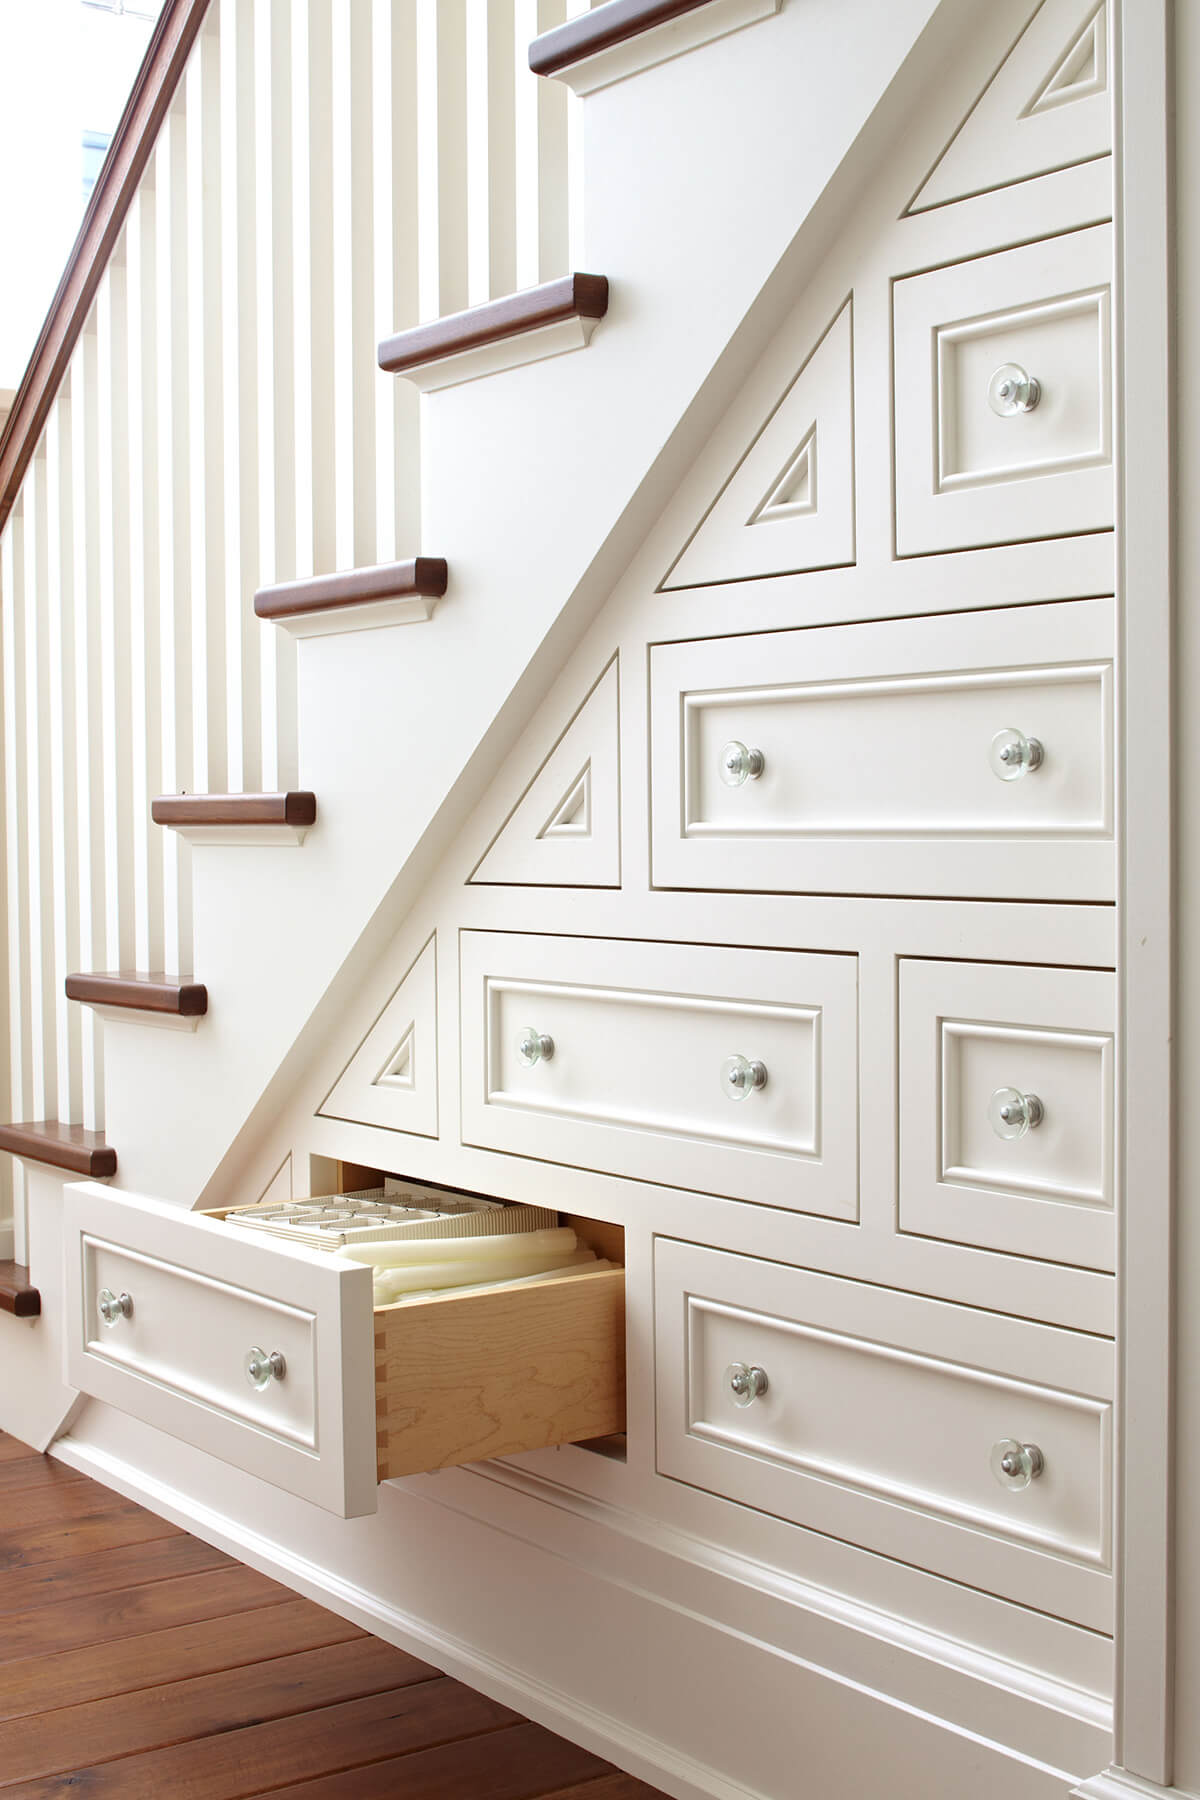 Built-in Staircase Chest of Drawers